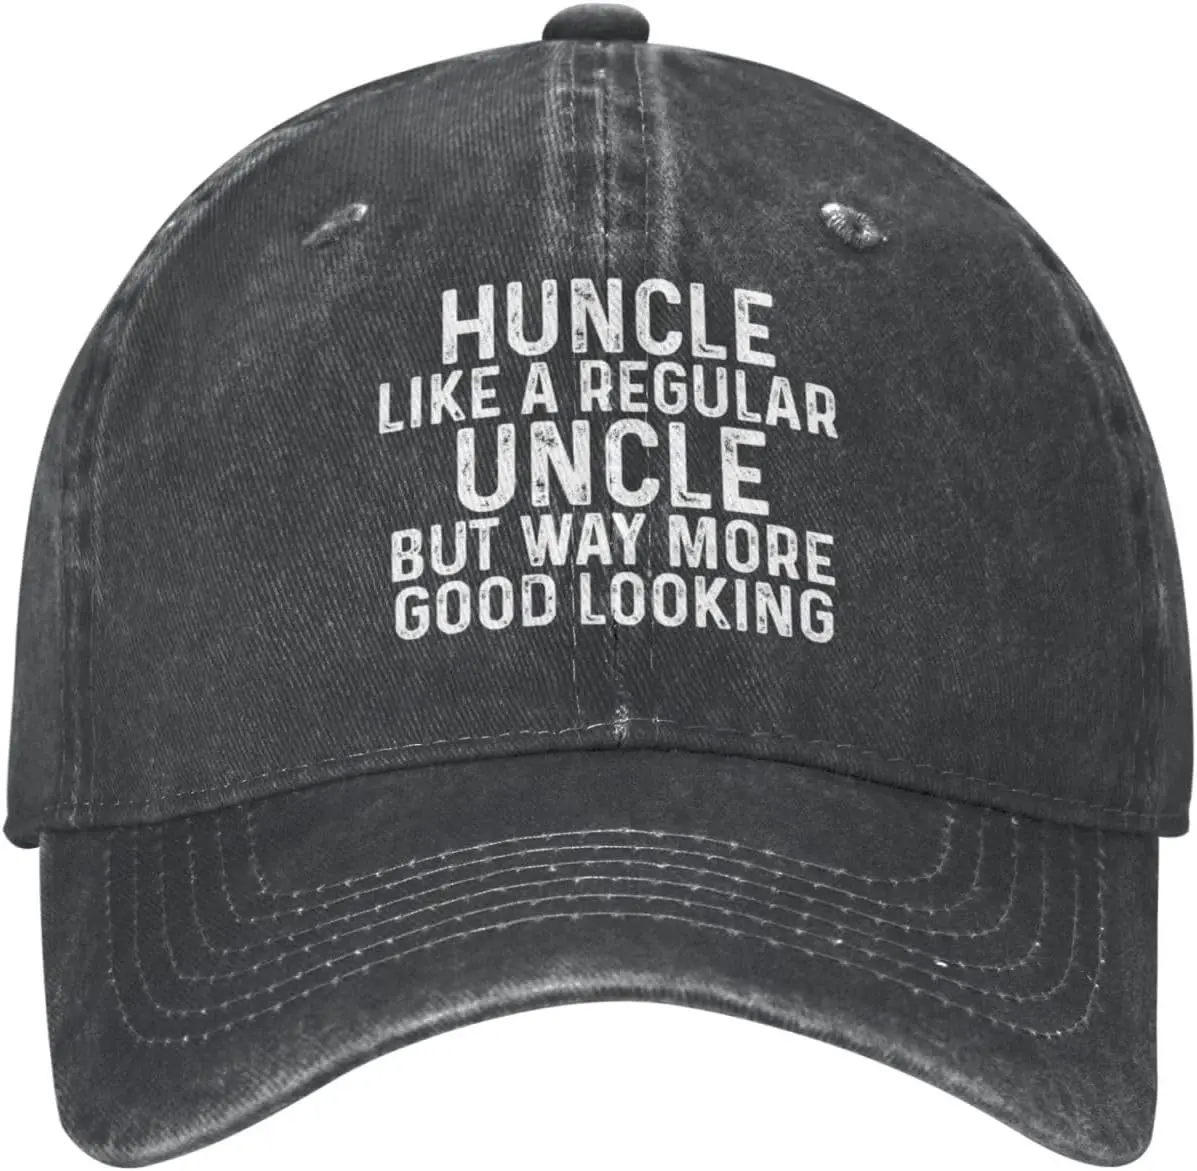 

Huncle Like A Regular Uncle But Way More Good Looking Hat Women Dad Hat Cool Hats